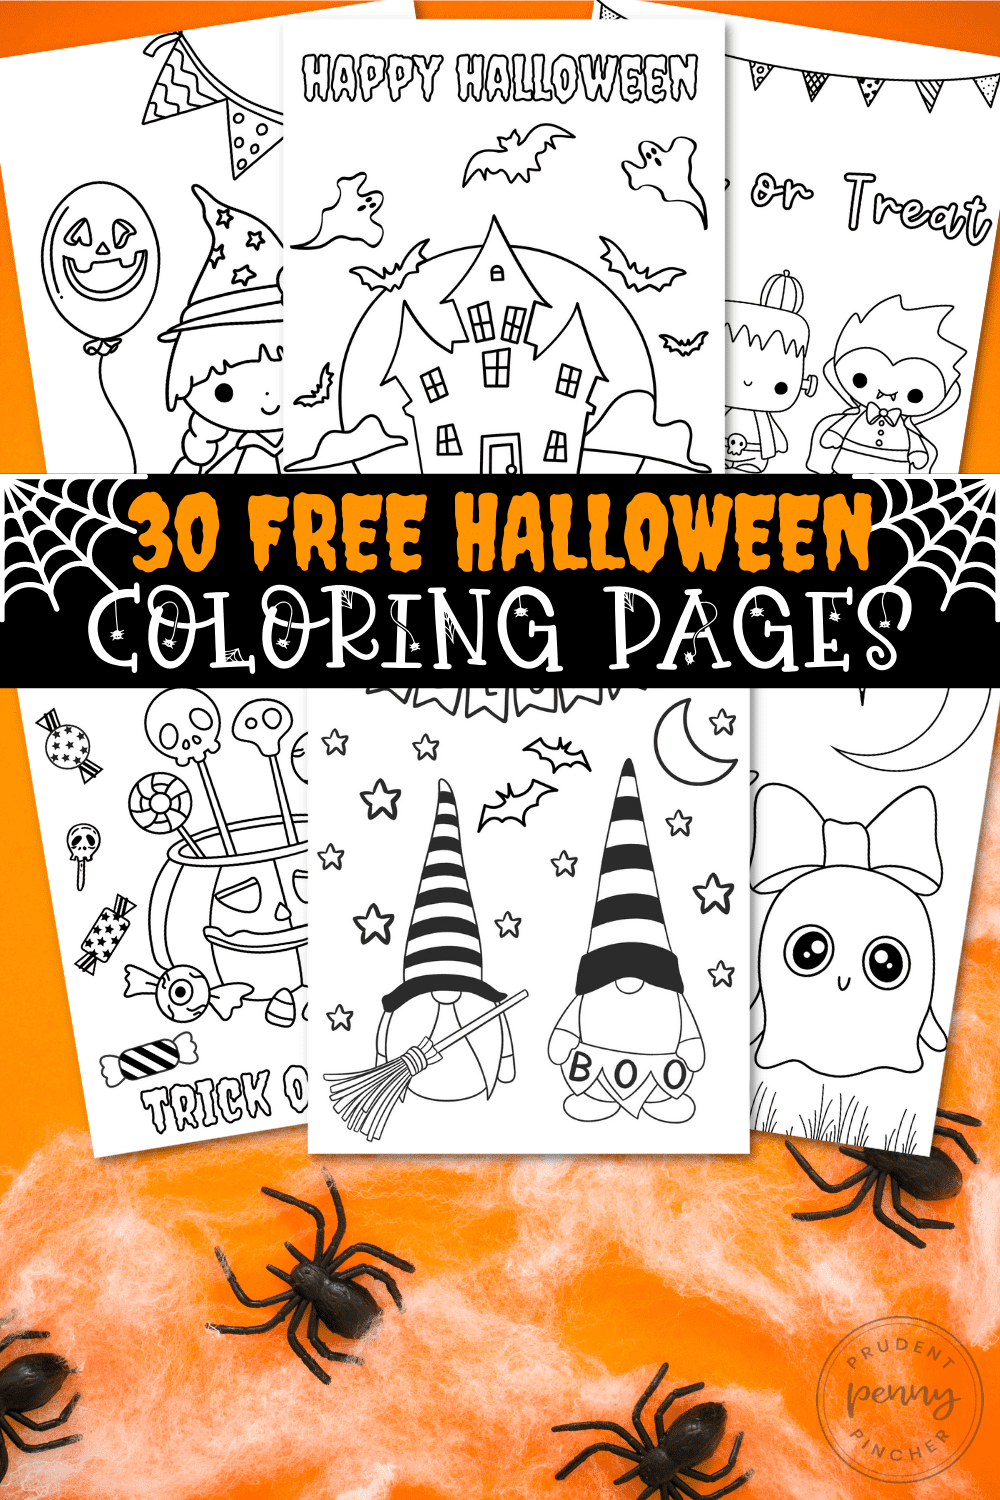 Get Coloring Pages - Free Coloring Pages for Kids and Adults